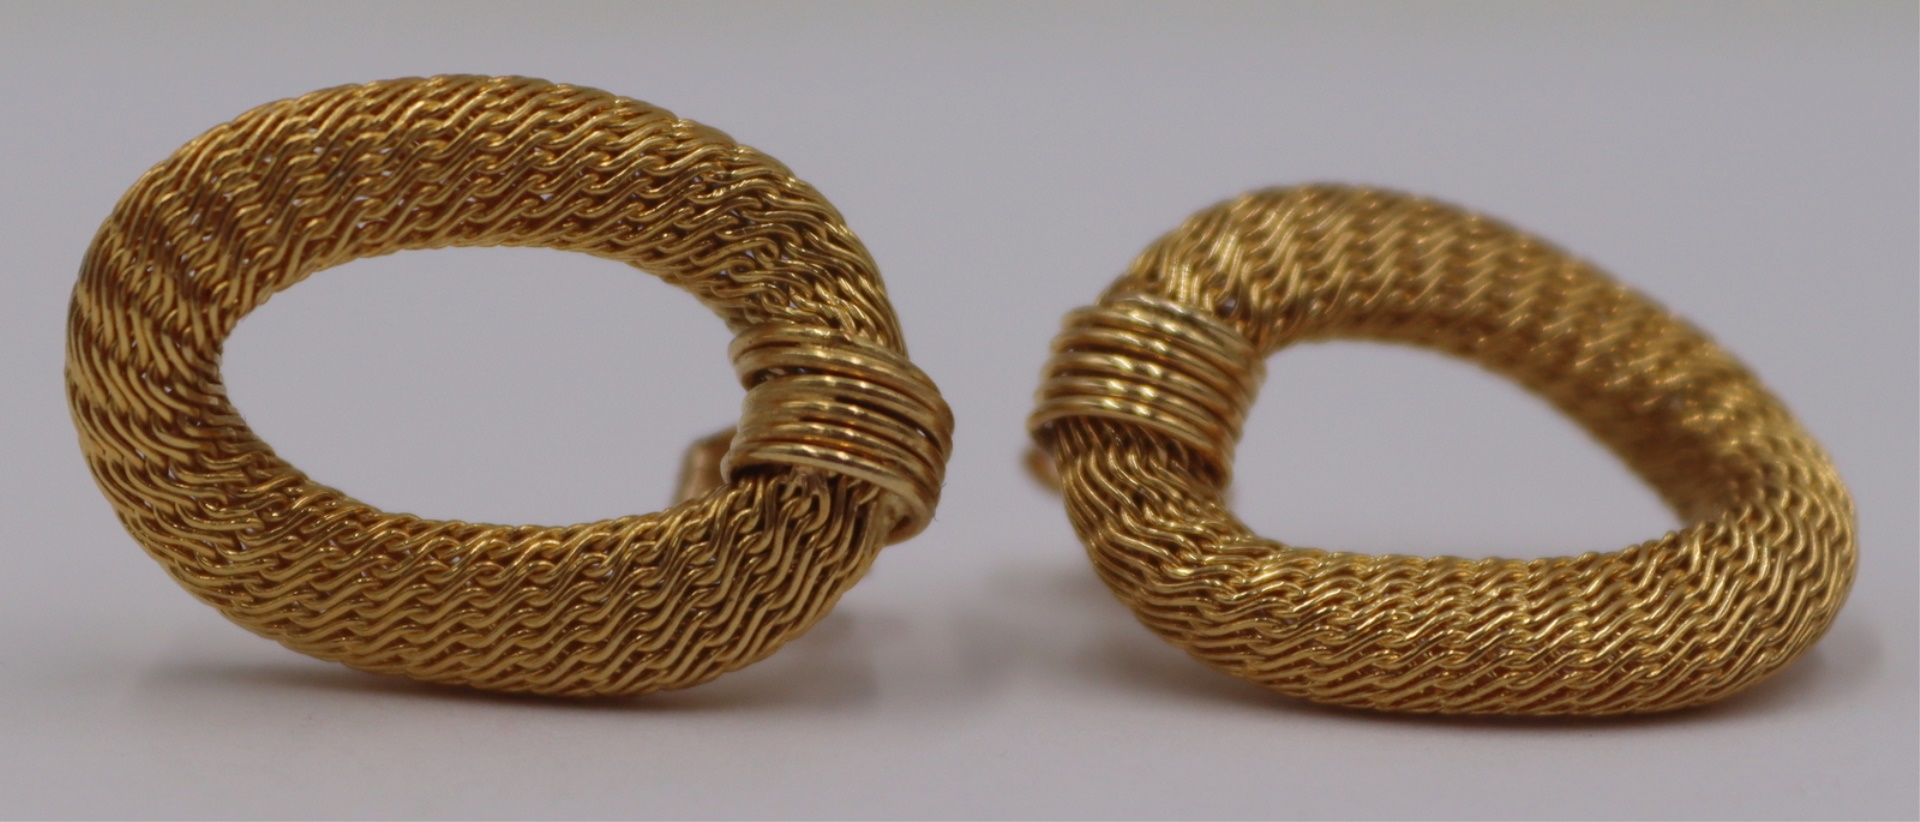 JEWELRY. PAIR OF 18KT GOLD WOVEN